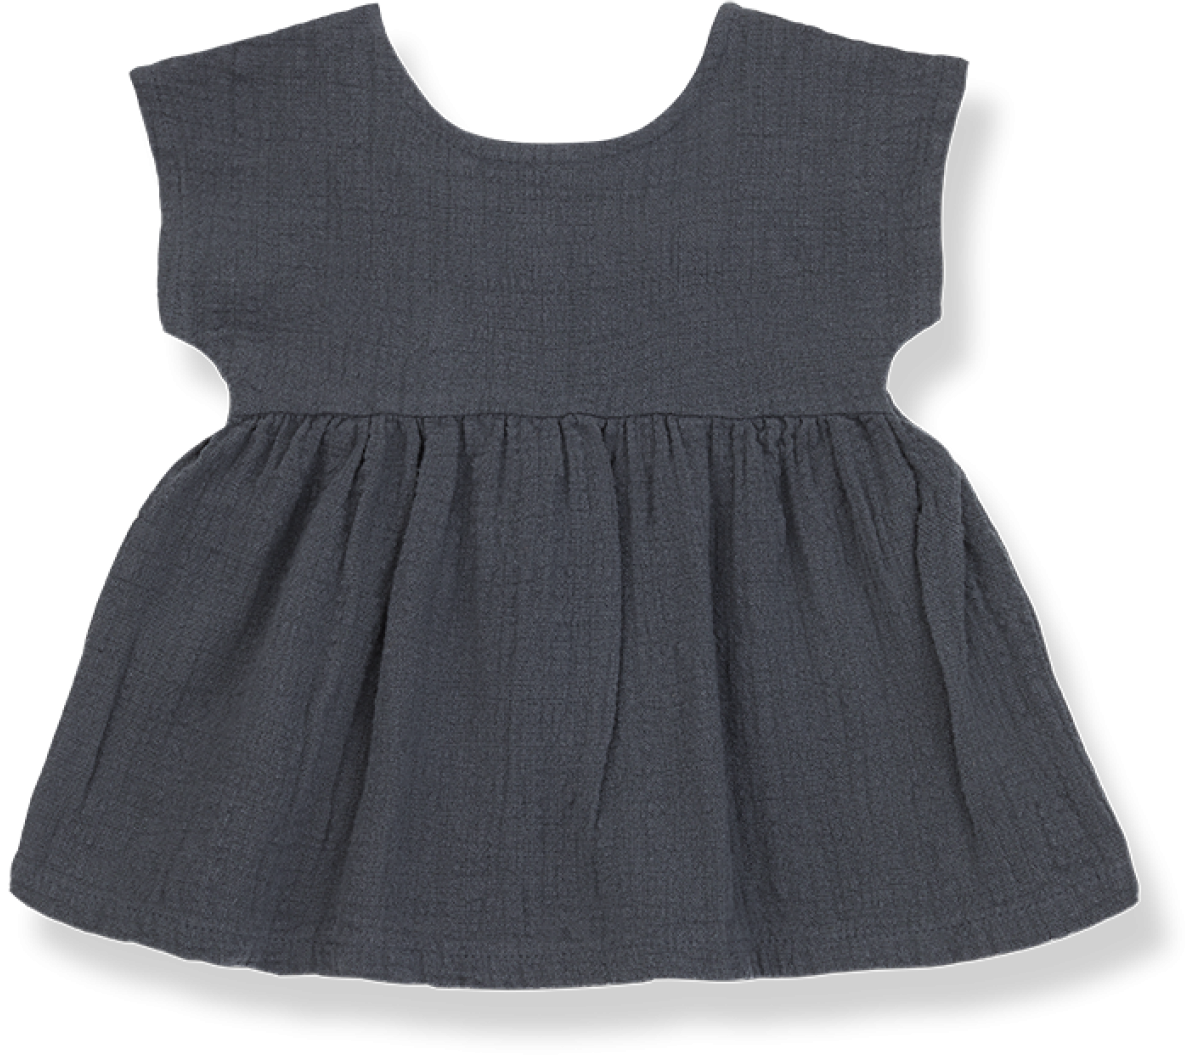 pauze Verblinding Pijlpunt 1+ in the Family Bruna Bambula Woven Dress Anthracite - Orange Ma